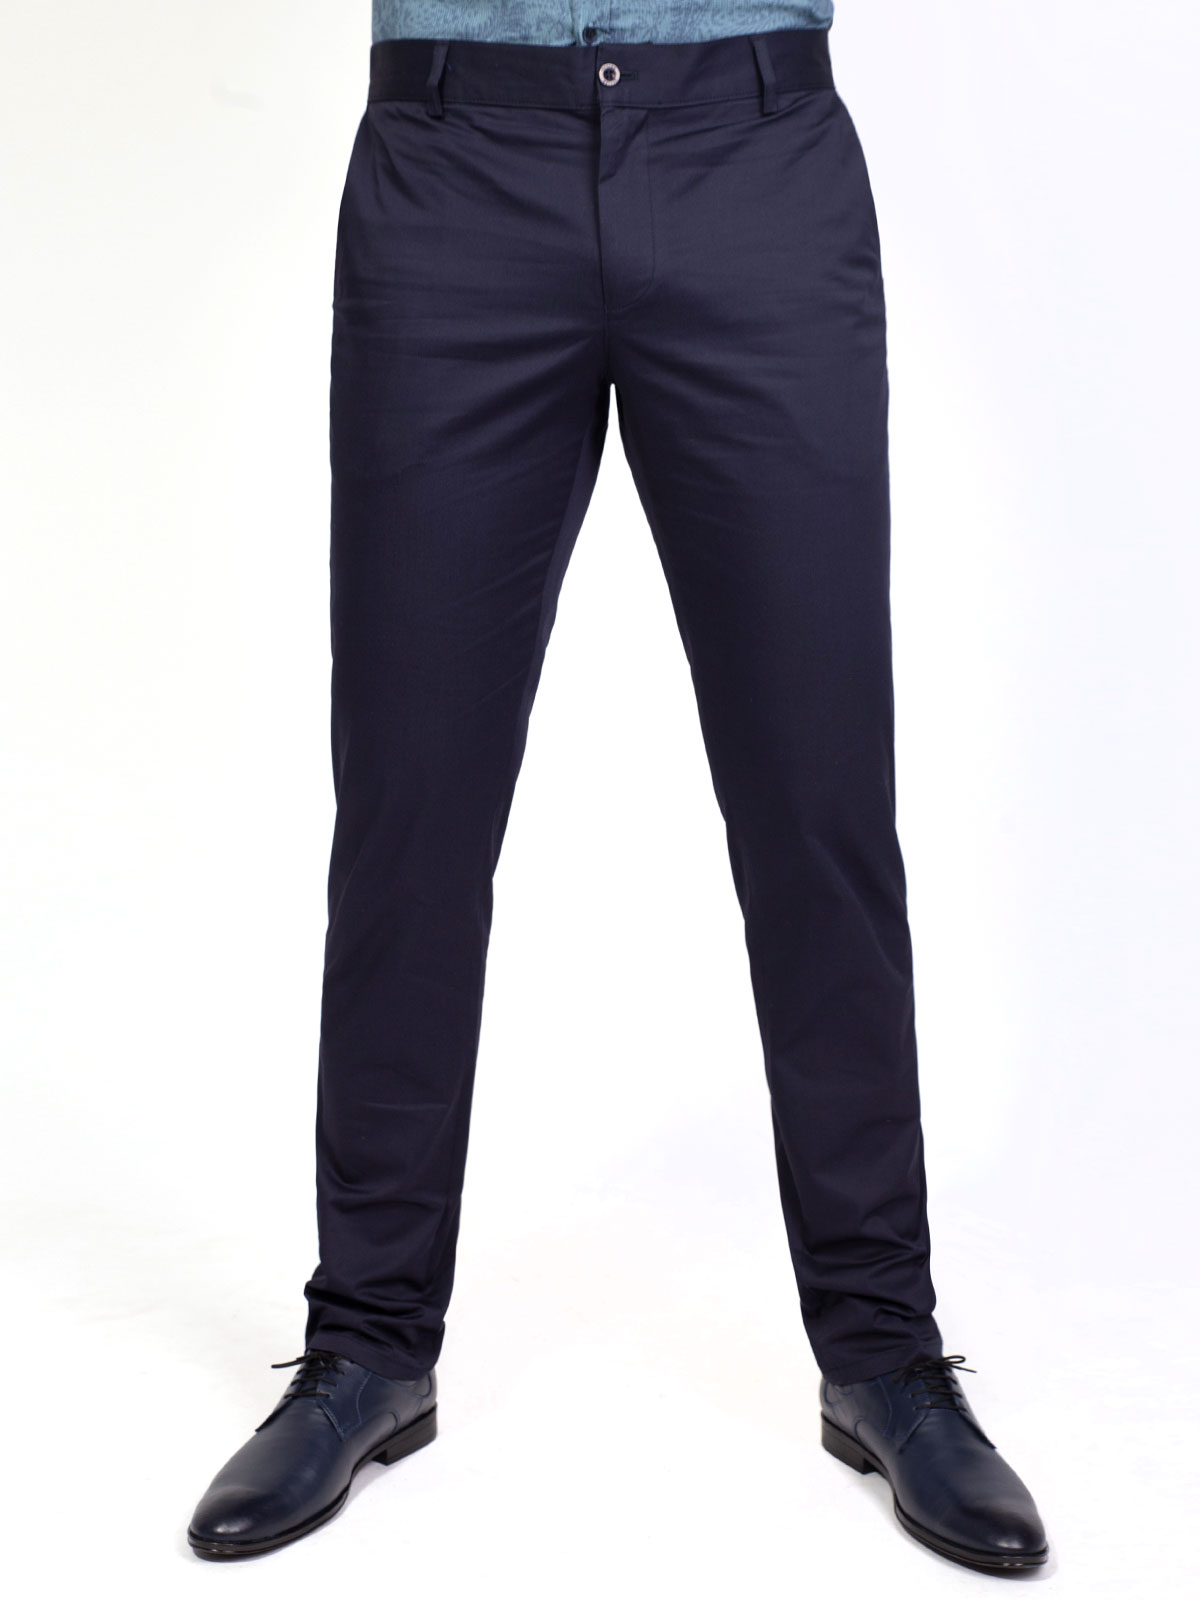  fitted navy blue sporty elegant pants  - 63189 € 44.40 img1